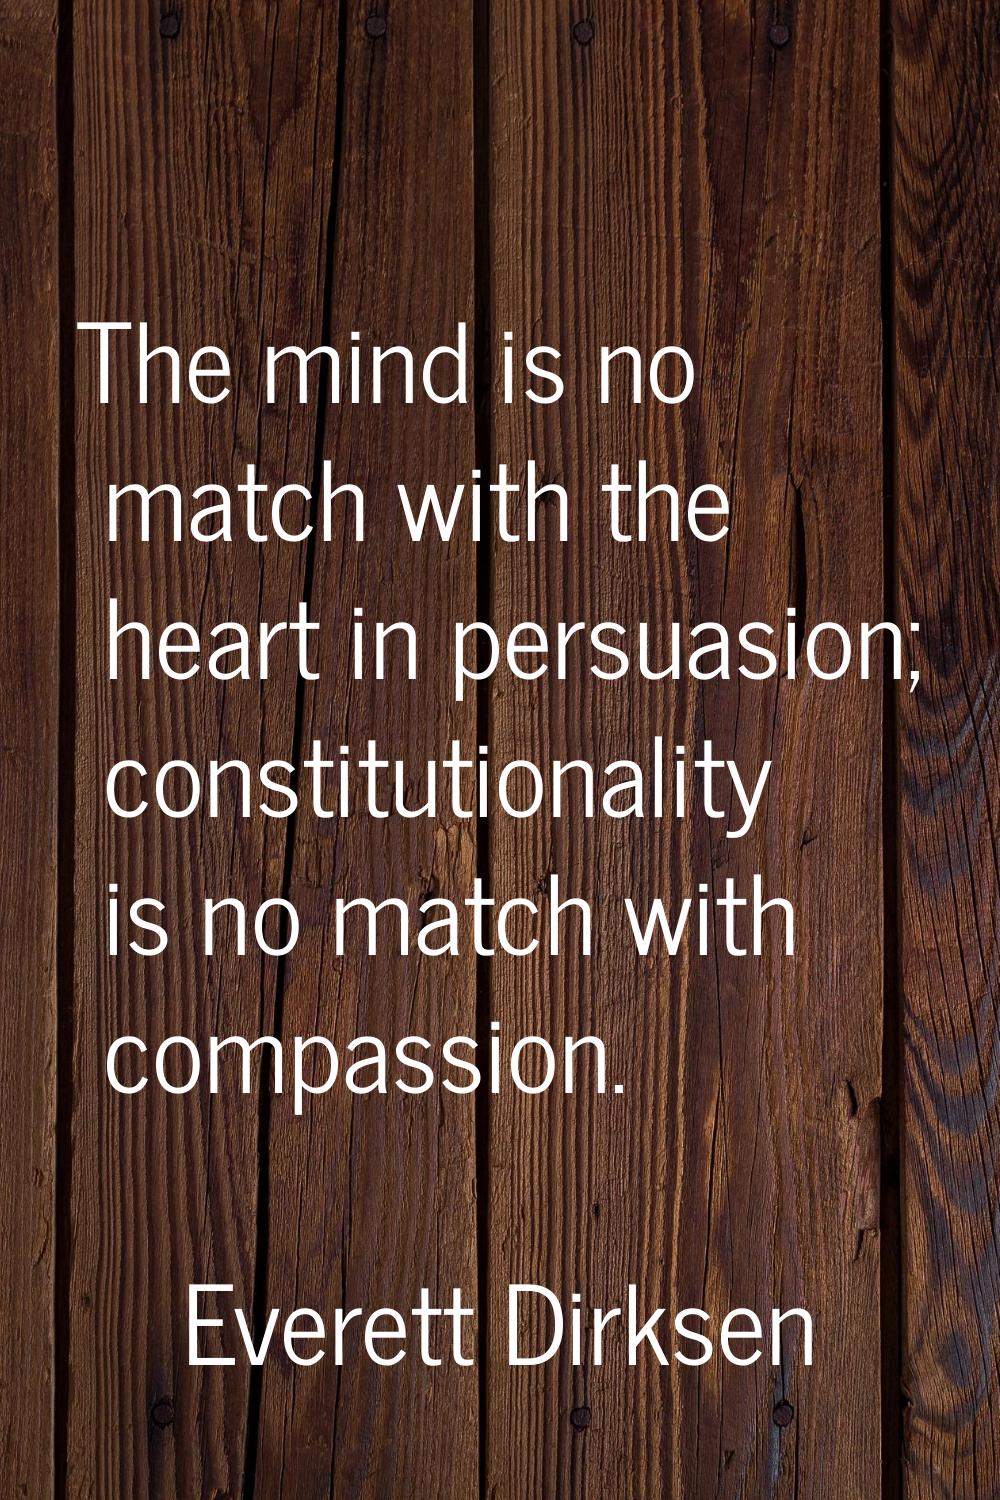 The mind is no match with the heart in persuasion; constitutionality is no match with compassion.